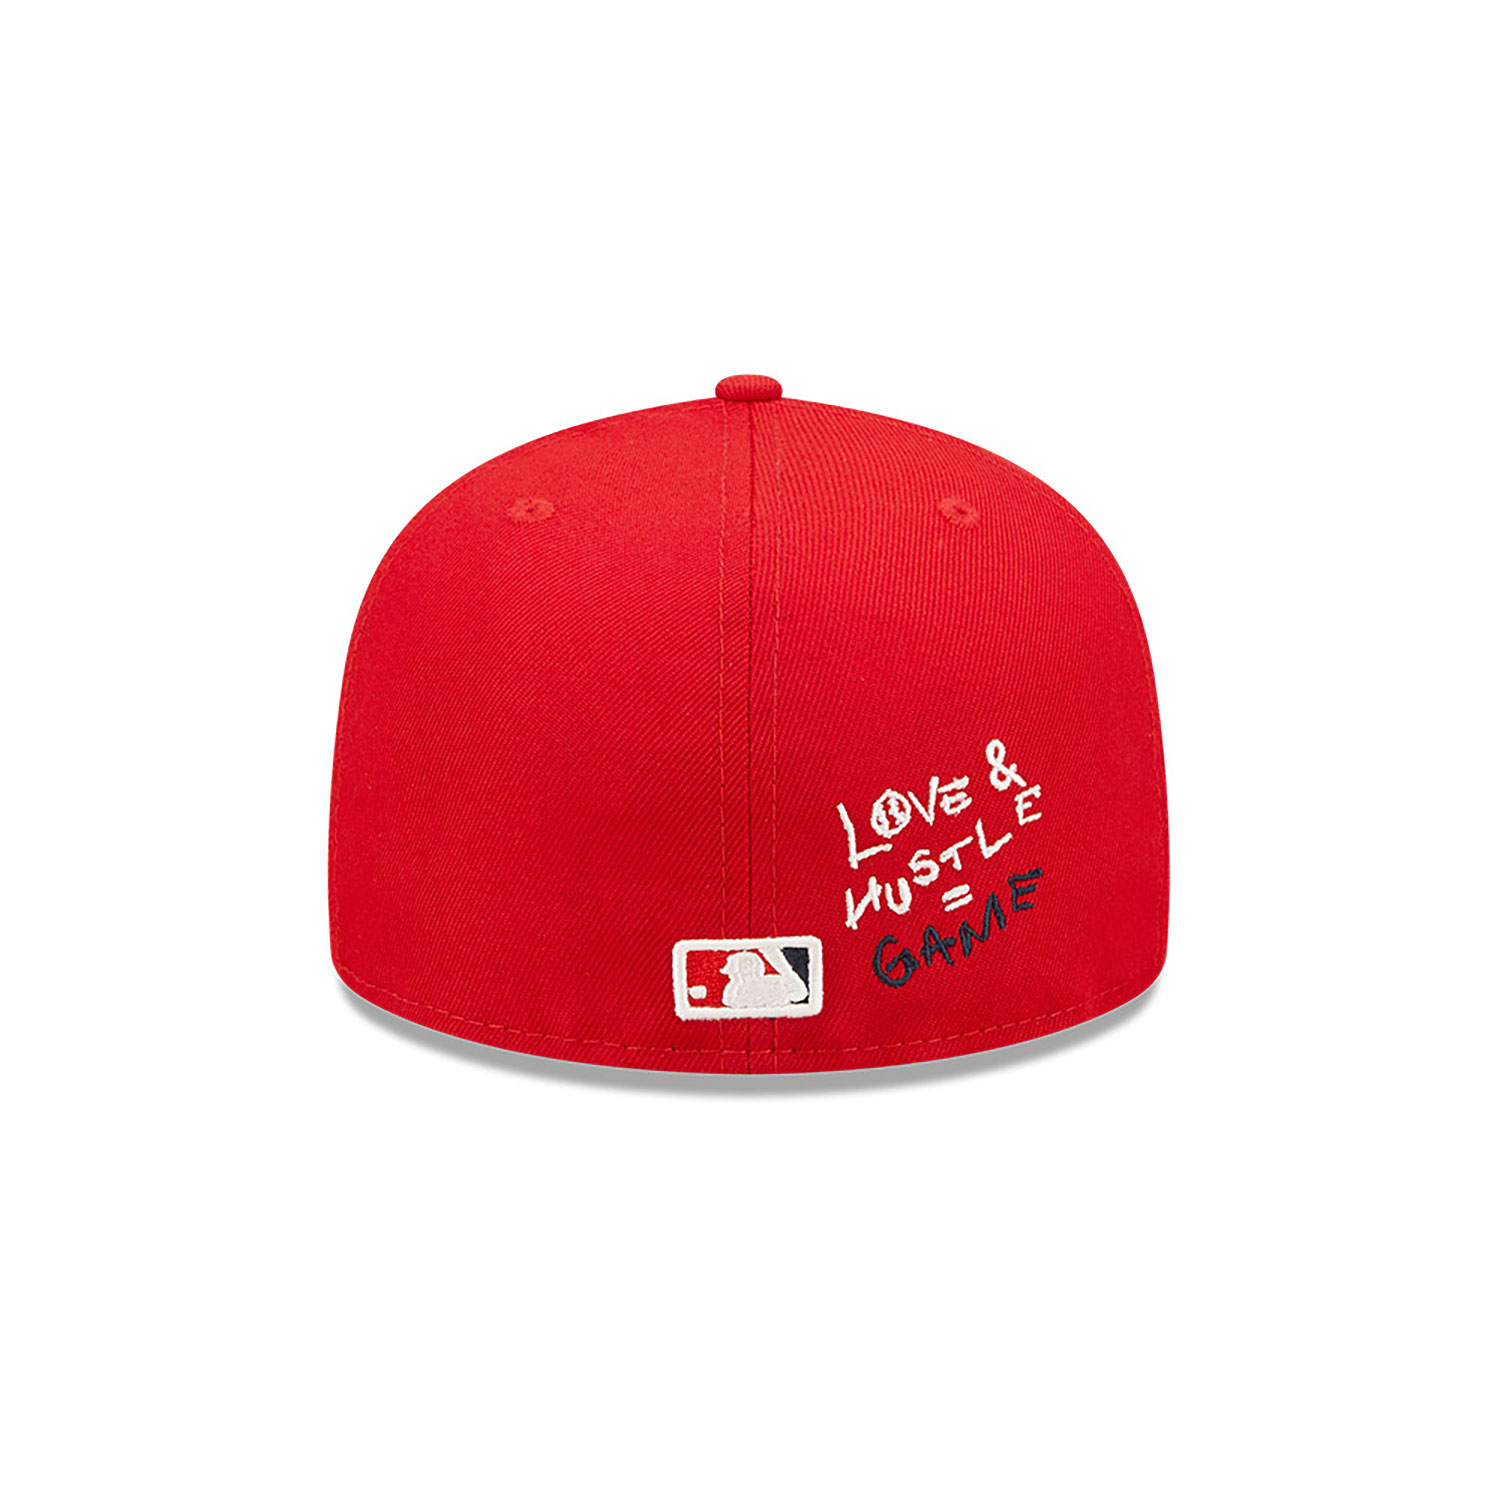 Washington MLB Team Heart Red 59FIFTY Fitted Cap